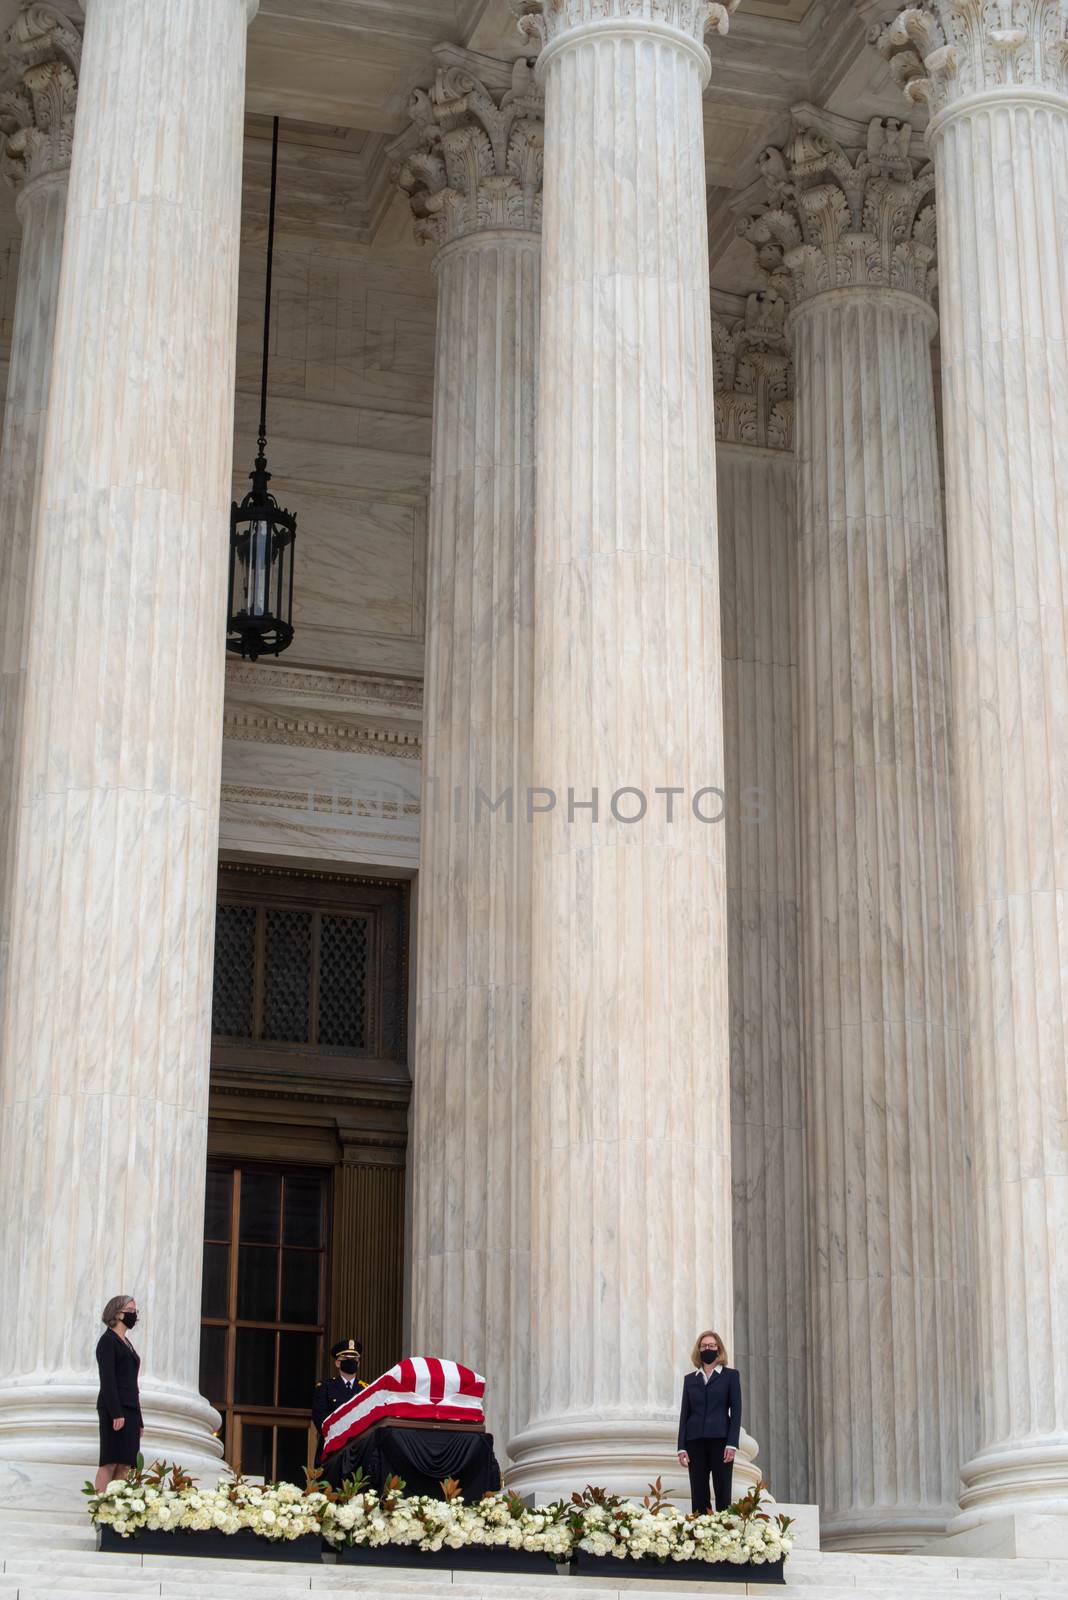 Washington, DC, USA / 9/24/2020: Justice Ruth Bader Ginsburg's casket draped in an American flag on the steps of the Supreme Court, pall bearers flowers, and tall columns in a vertical image editorial use.